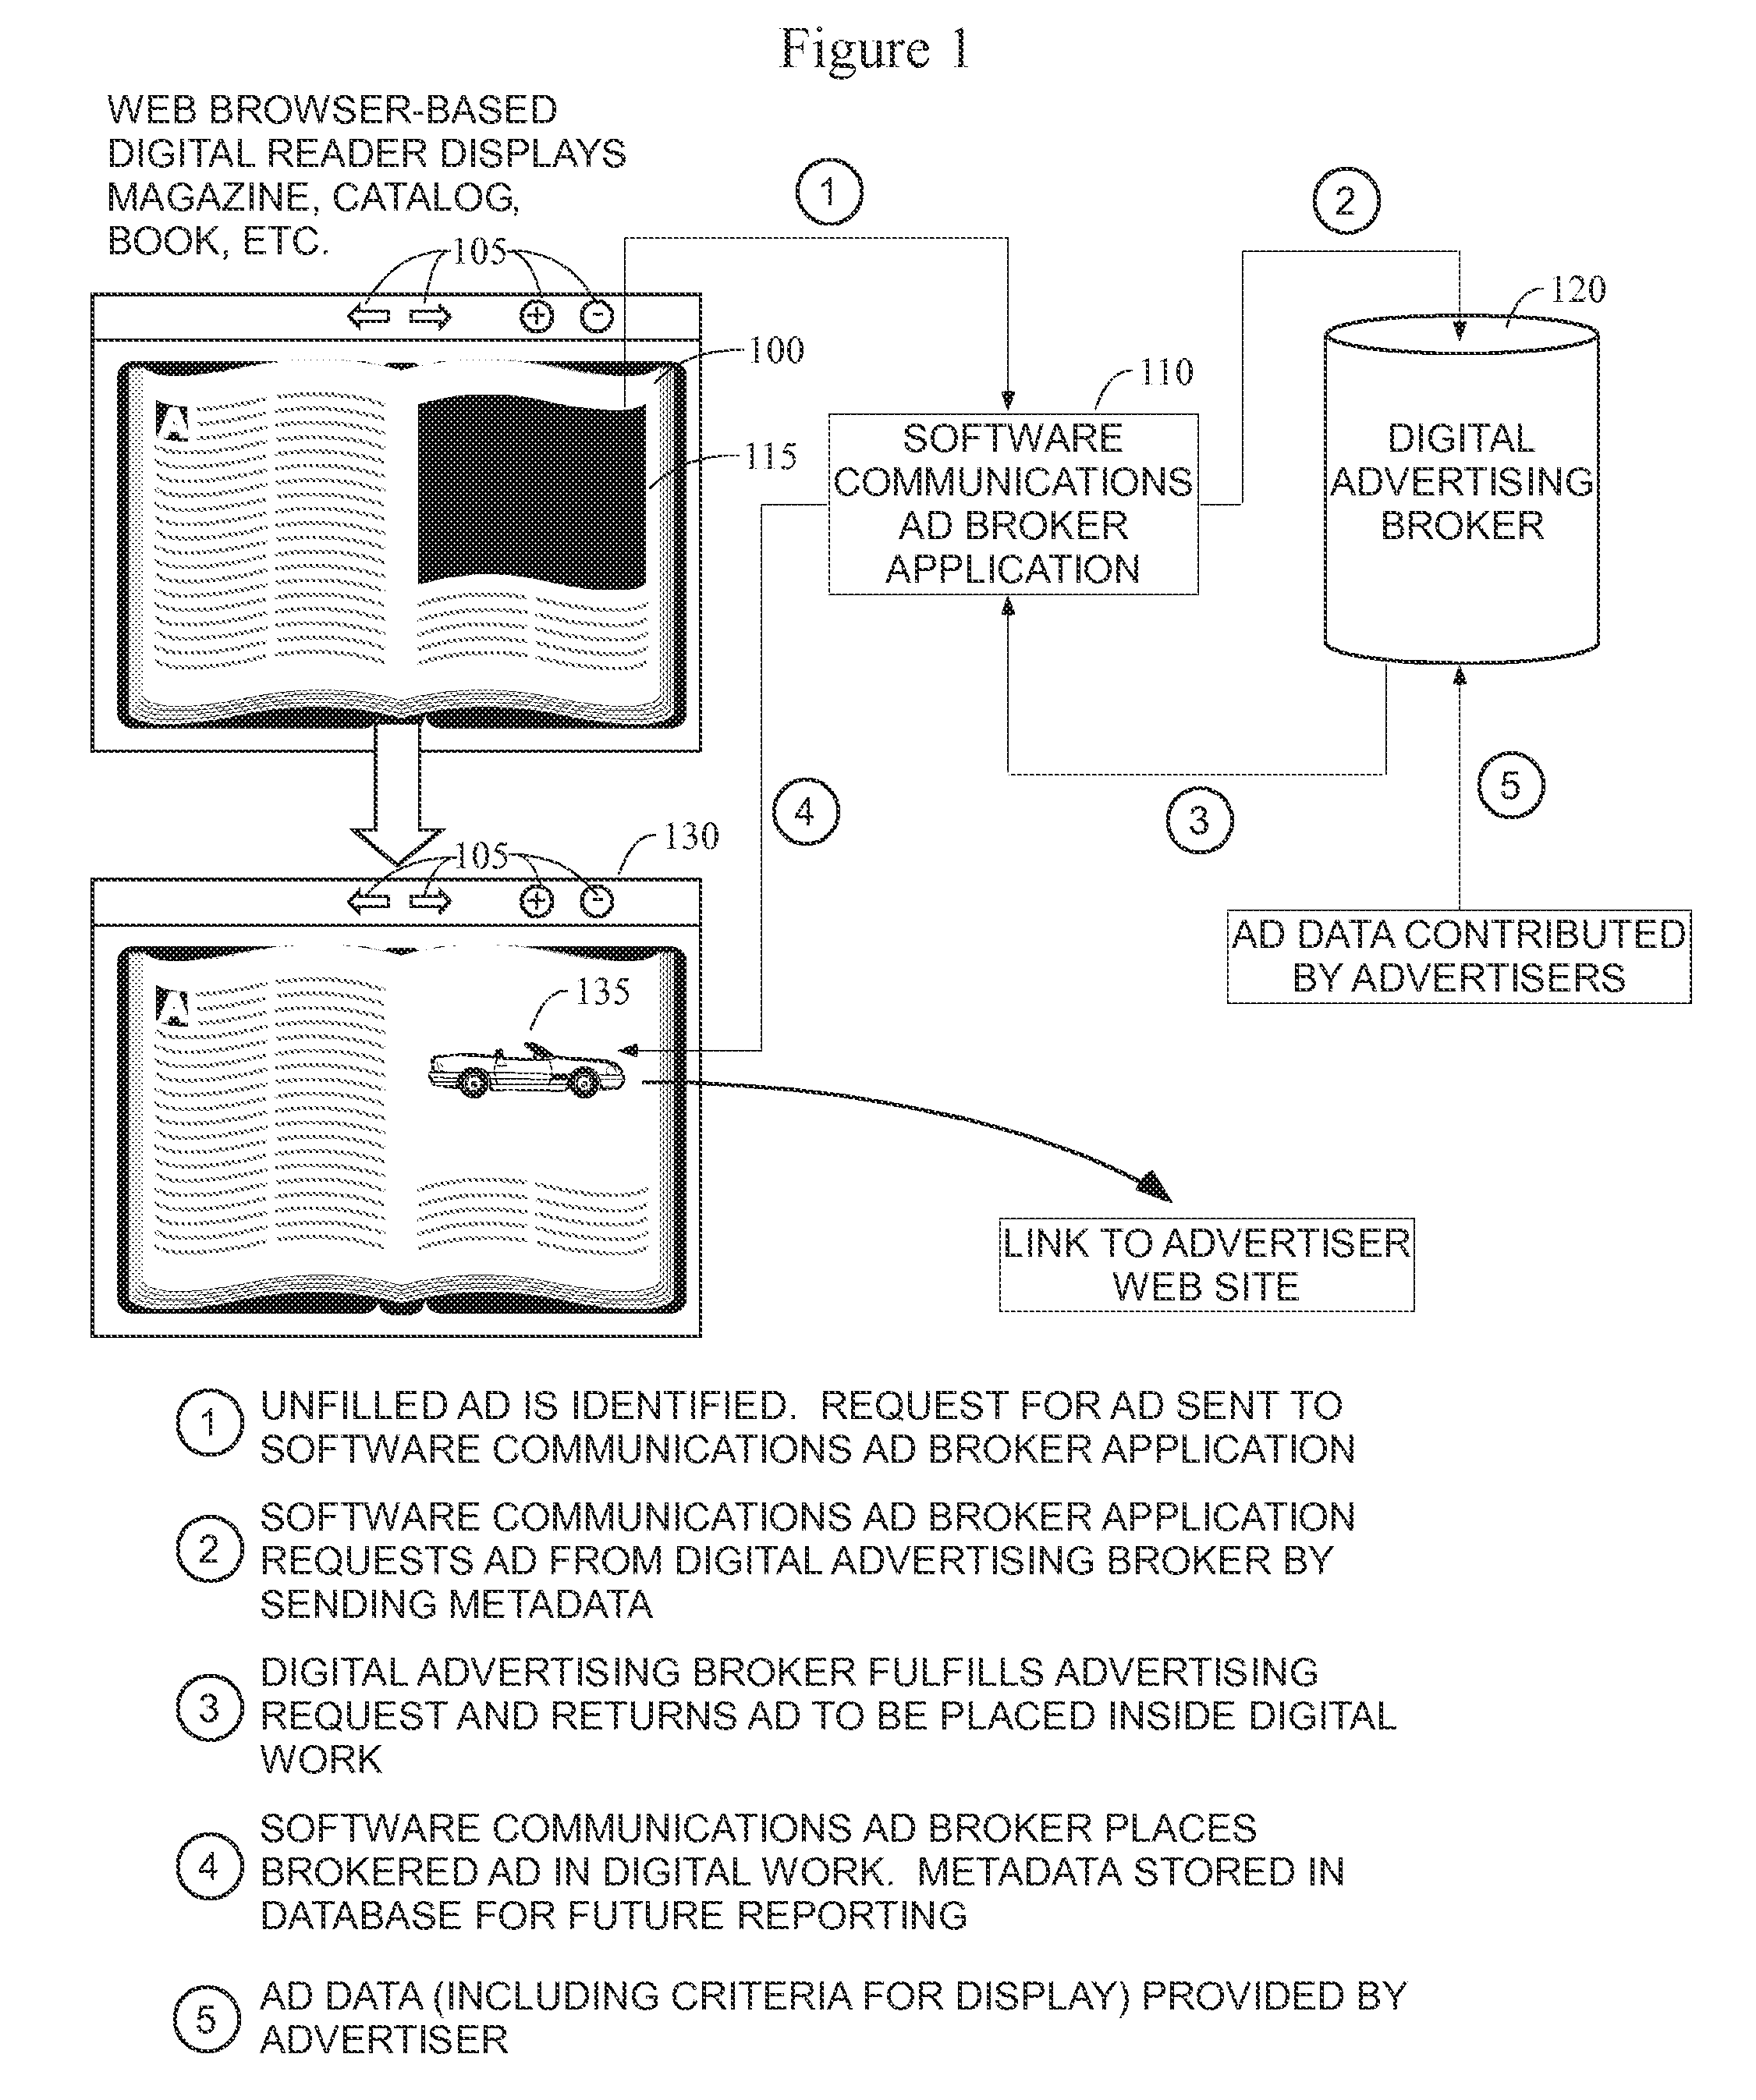 Method and apparatus for system communications application between digital magazines, catalogs, and/or books and digital advertising brokers